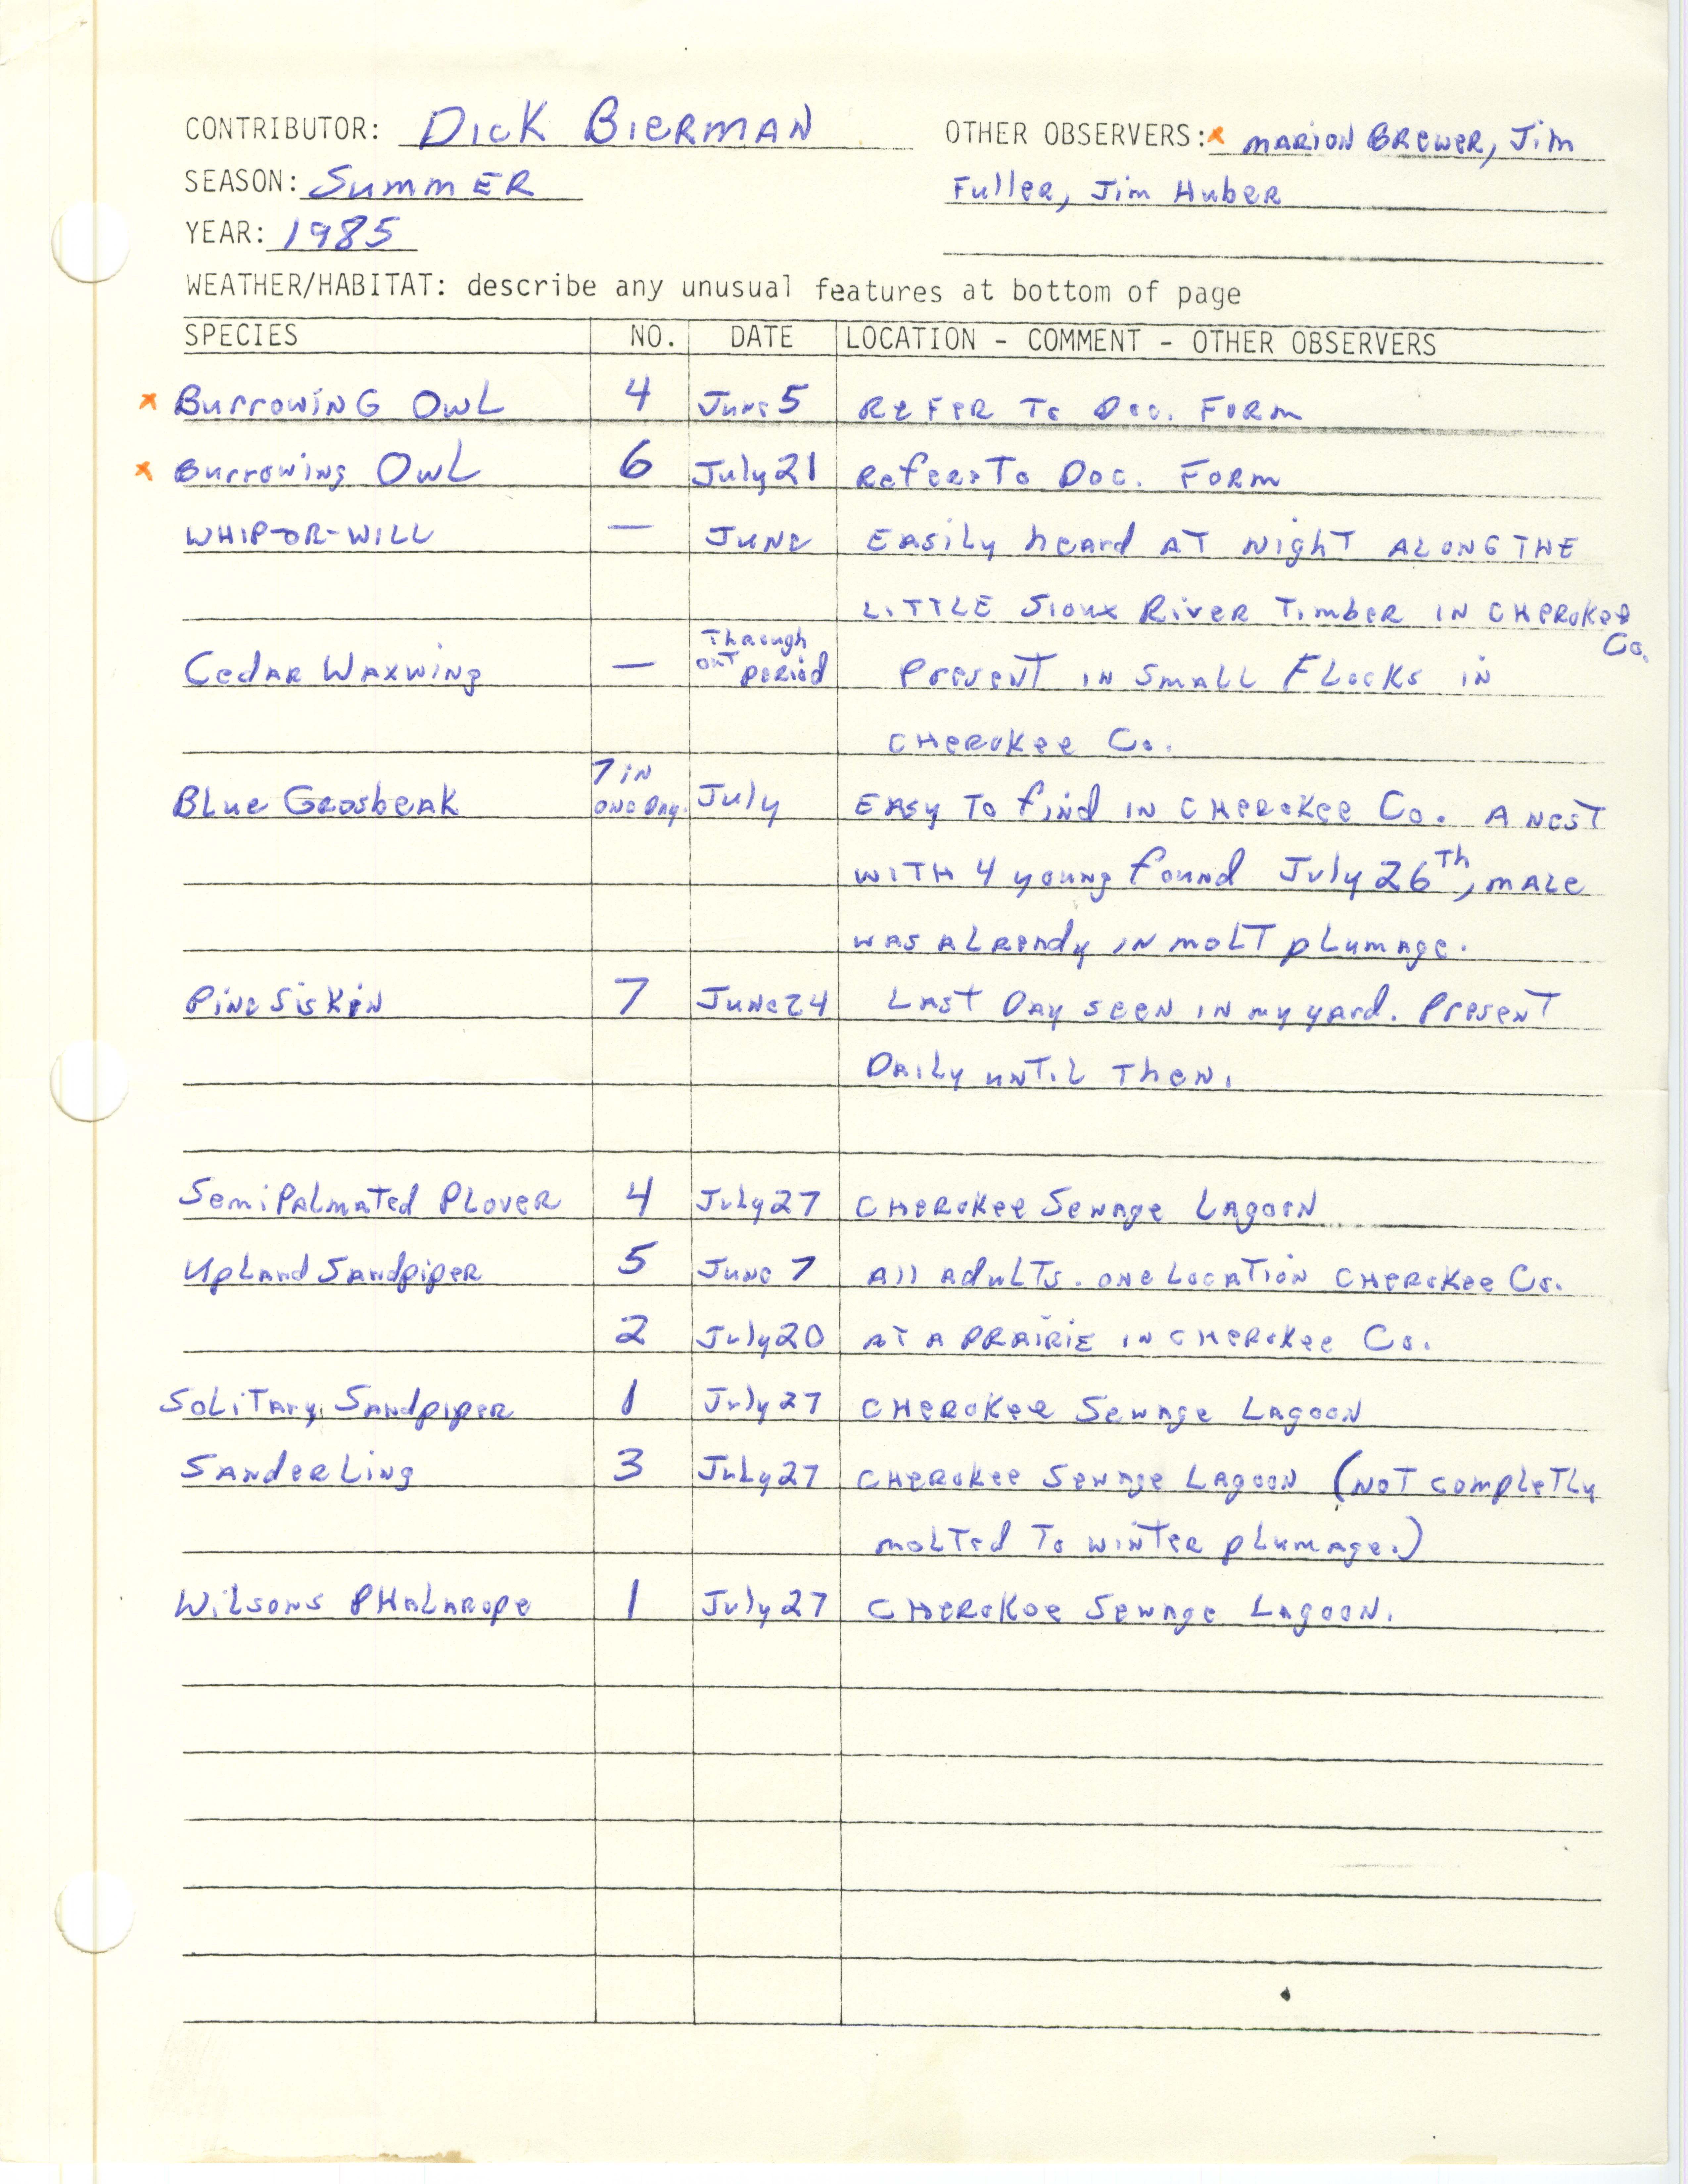 Field notes contributed by Dick Bierman, summer 1985